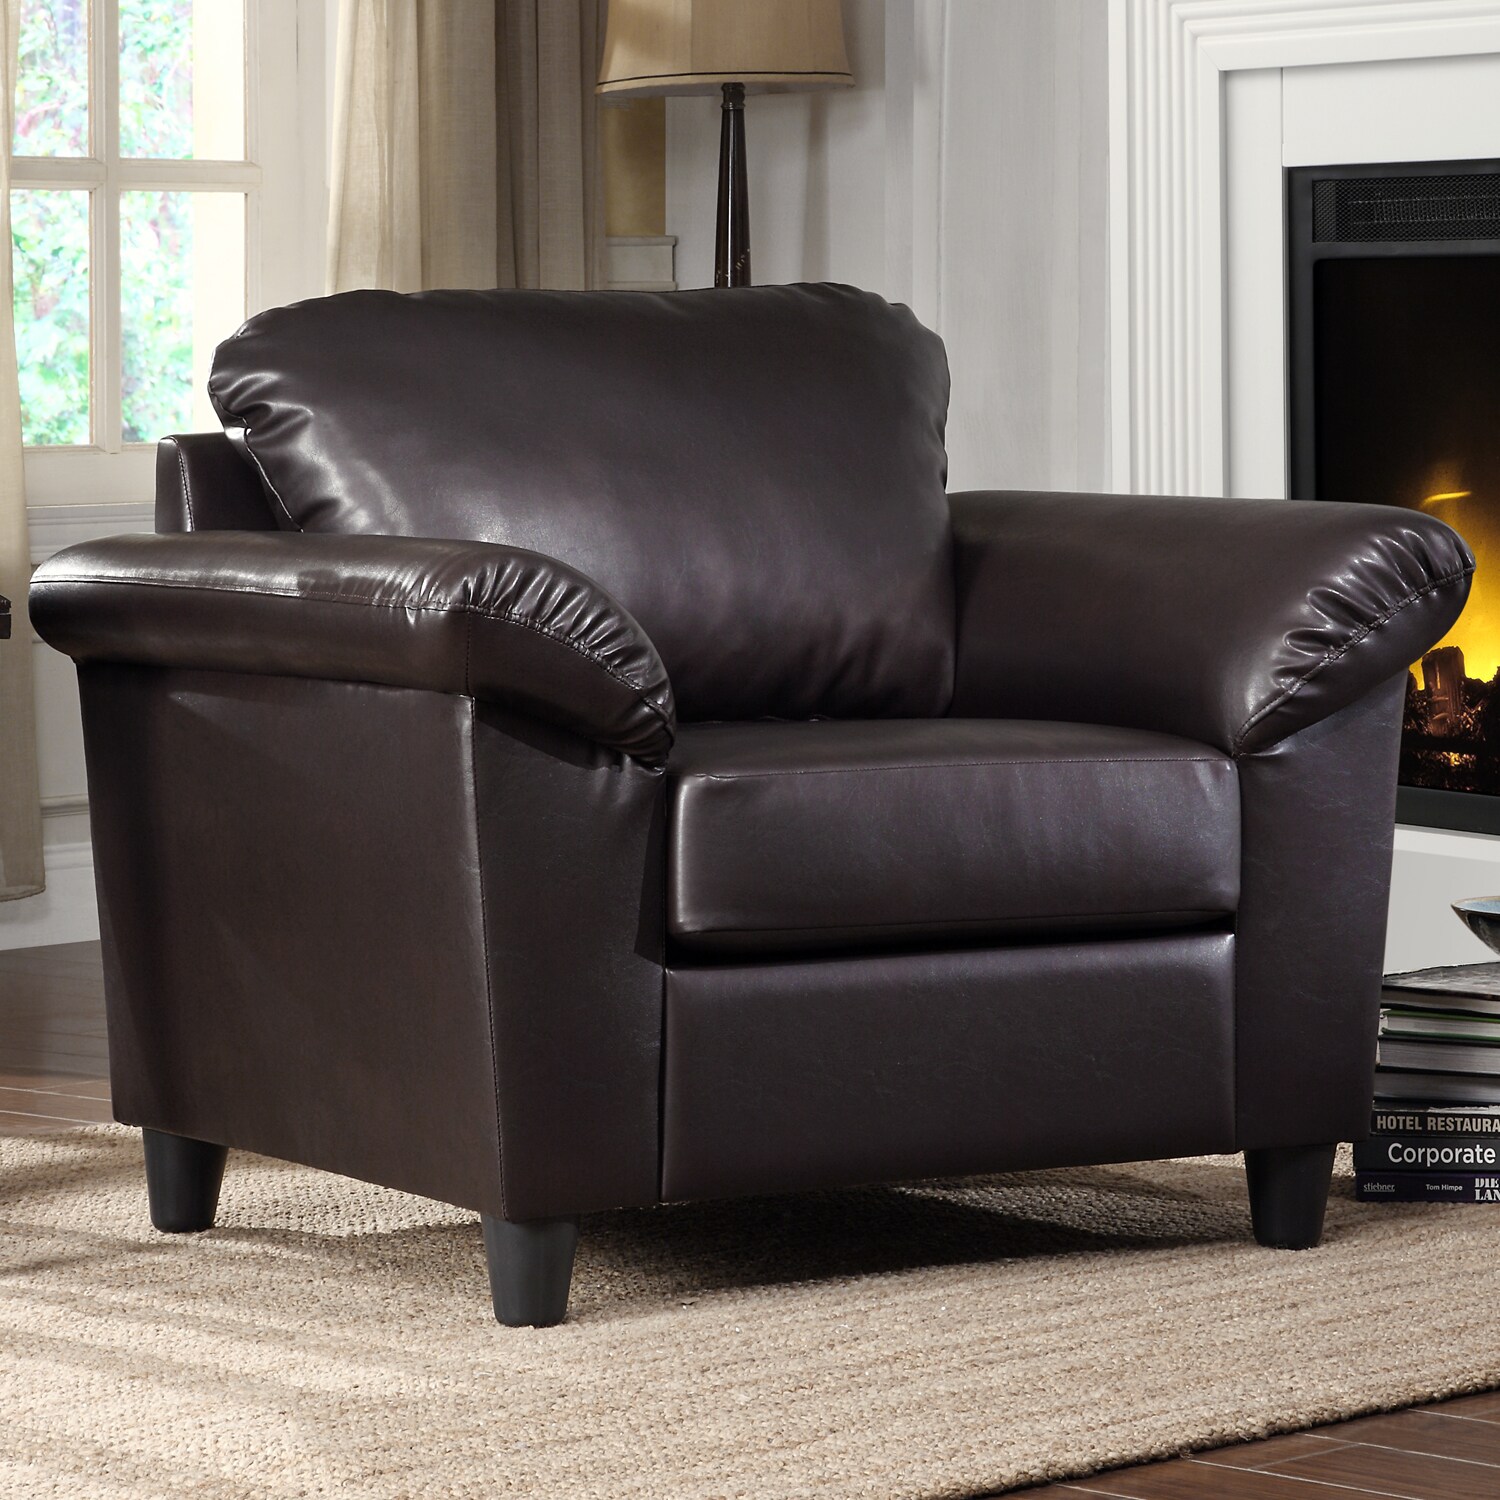 Insten Lucia Dark Brown Faux Leather Club Chair - Free Shipping Today